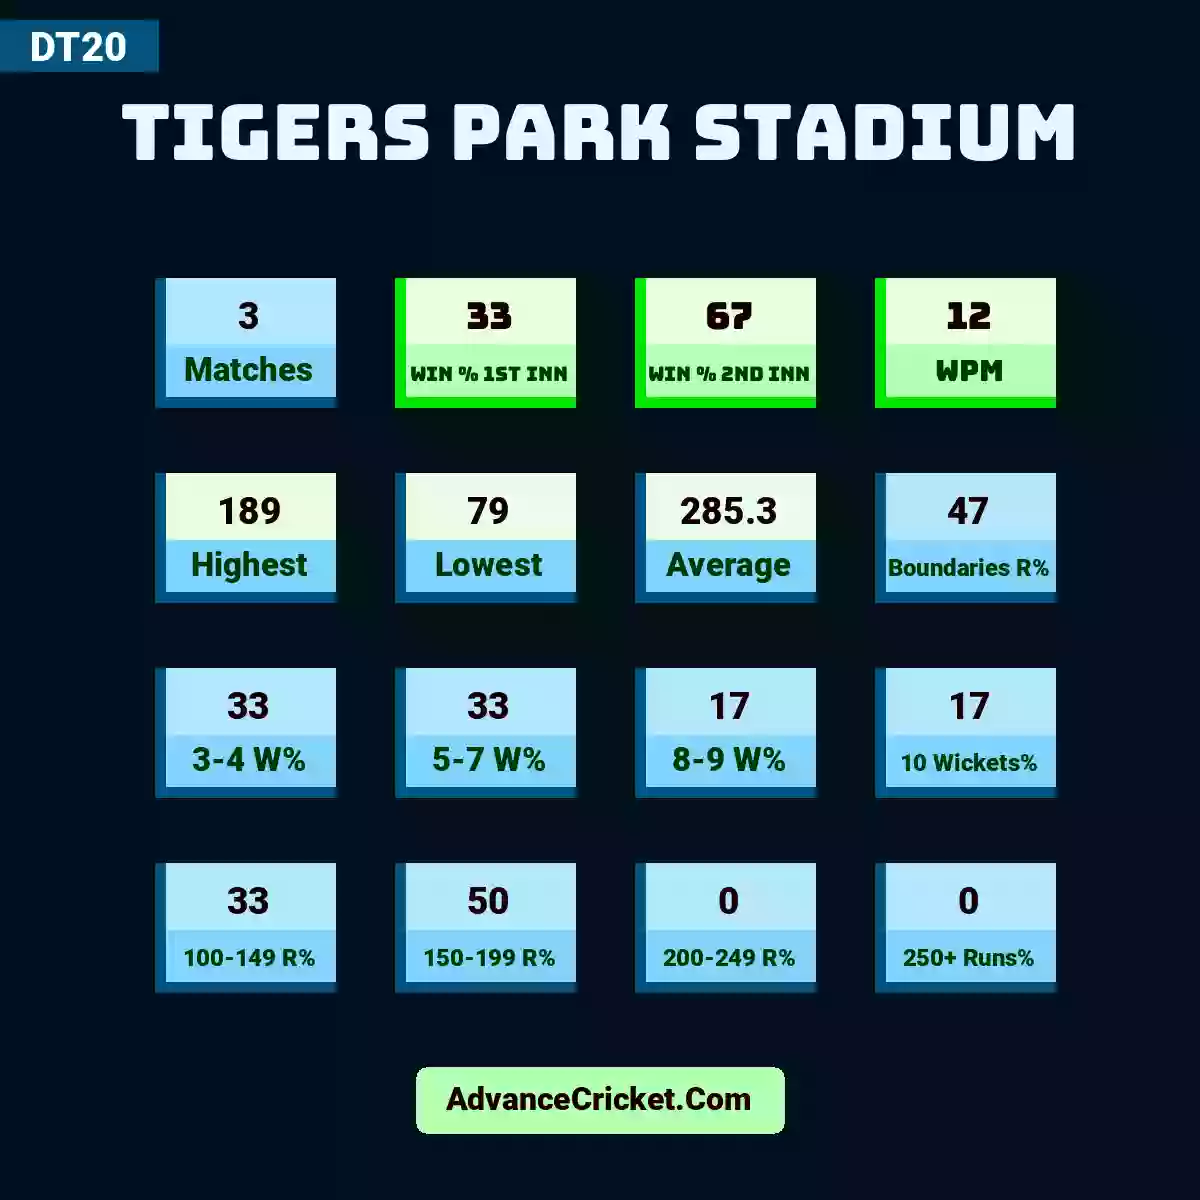 Image showing Tigers Park Stadium with Matches: 3, Win % 1st Inn: 33, Win % 2nd Inn: 67, WPM: 12, Highest: 189, Lowest: 79, Average: 285.3, Boundaries R%: 47, 3-4 W%: 33, 5-7 W%: 33, 8-9 W%: 17, 10 Wickets%: 17, 100-149 R%: 33, 150-199 R%: 50, 200-249 R%: 0, 250+ Runs%: 0.